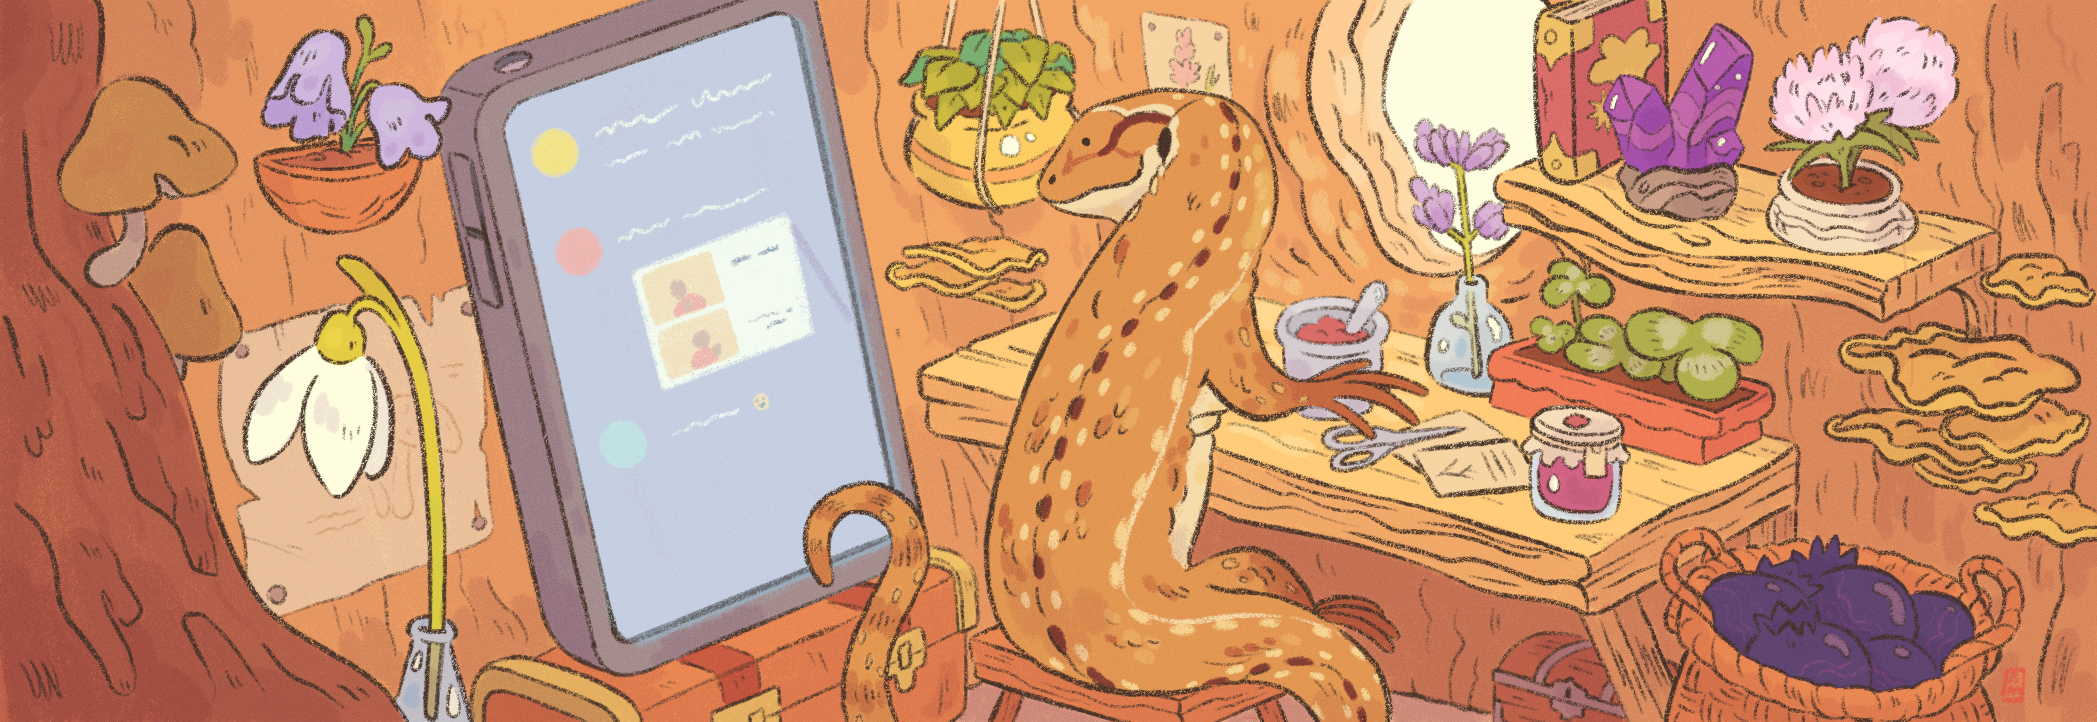 Illustration. A lizard working at a lizard-sized workbench, looking across at a phone the same size as it with a discord-style app open.